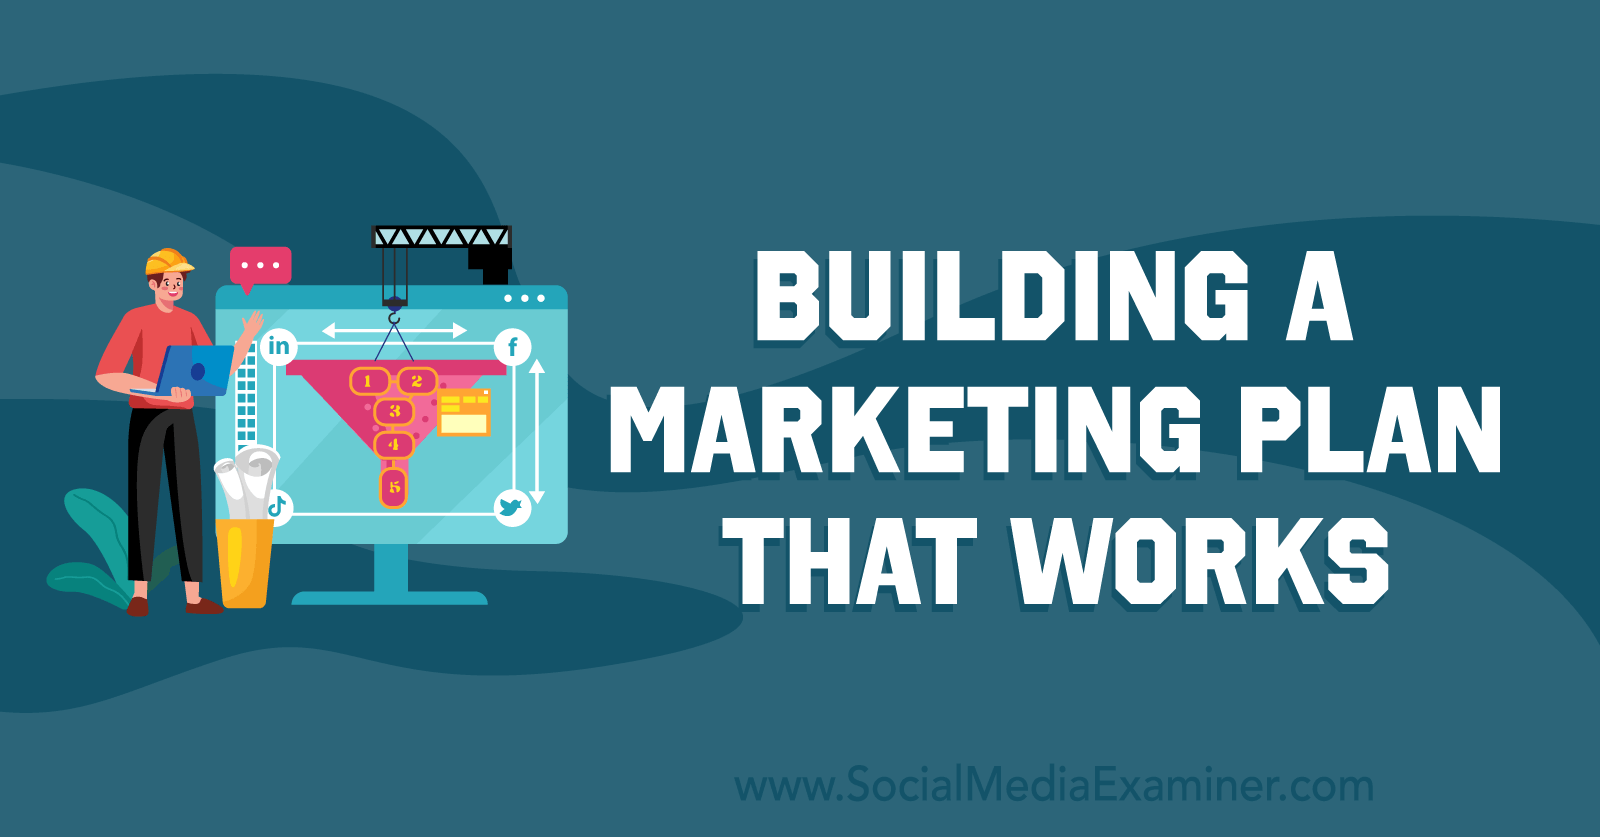 Building a Marketing Plan That Works by Social Media Examiner